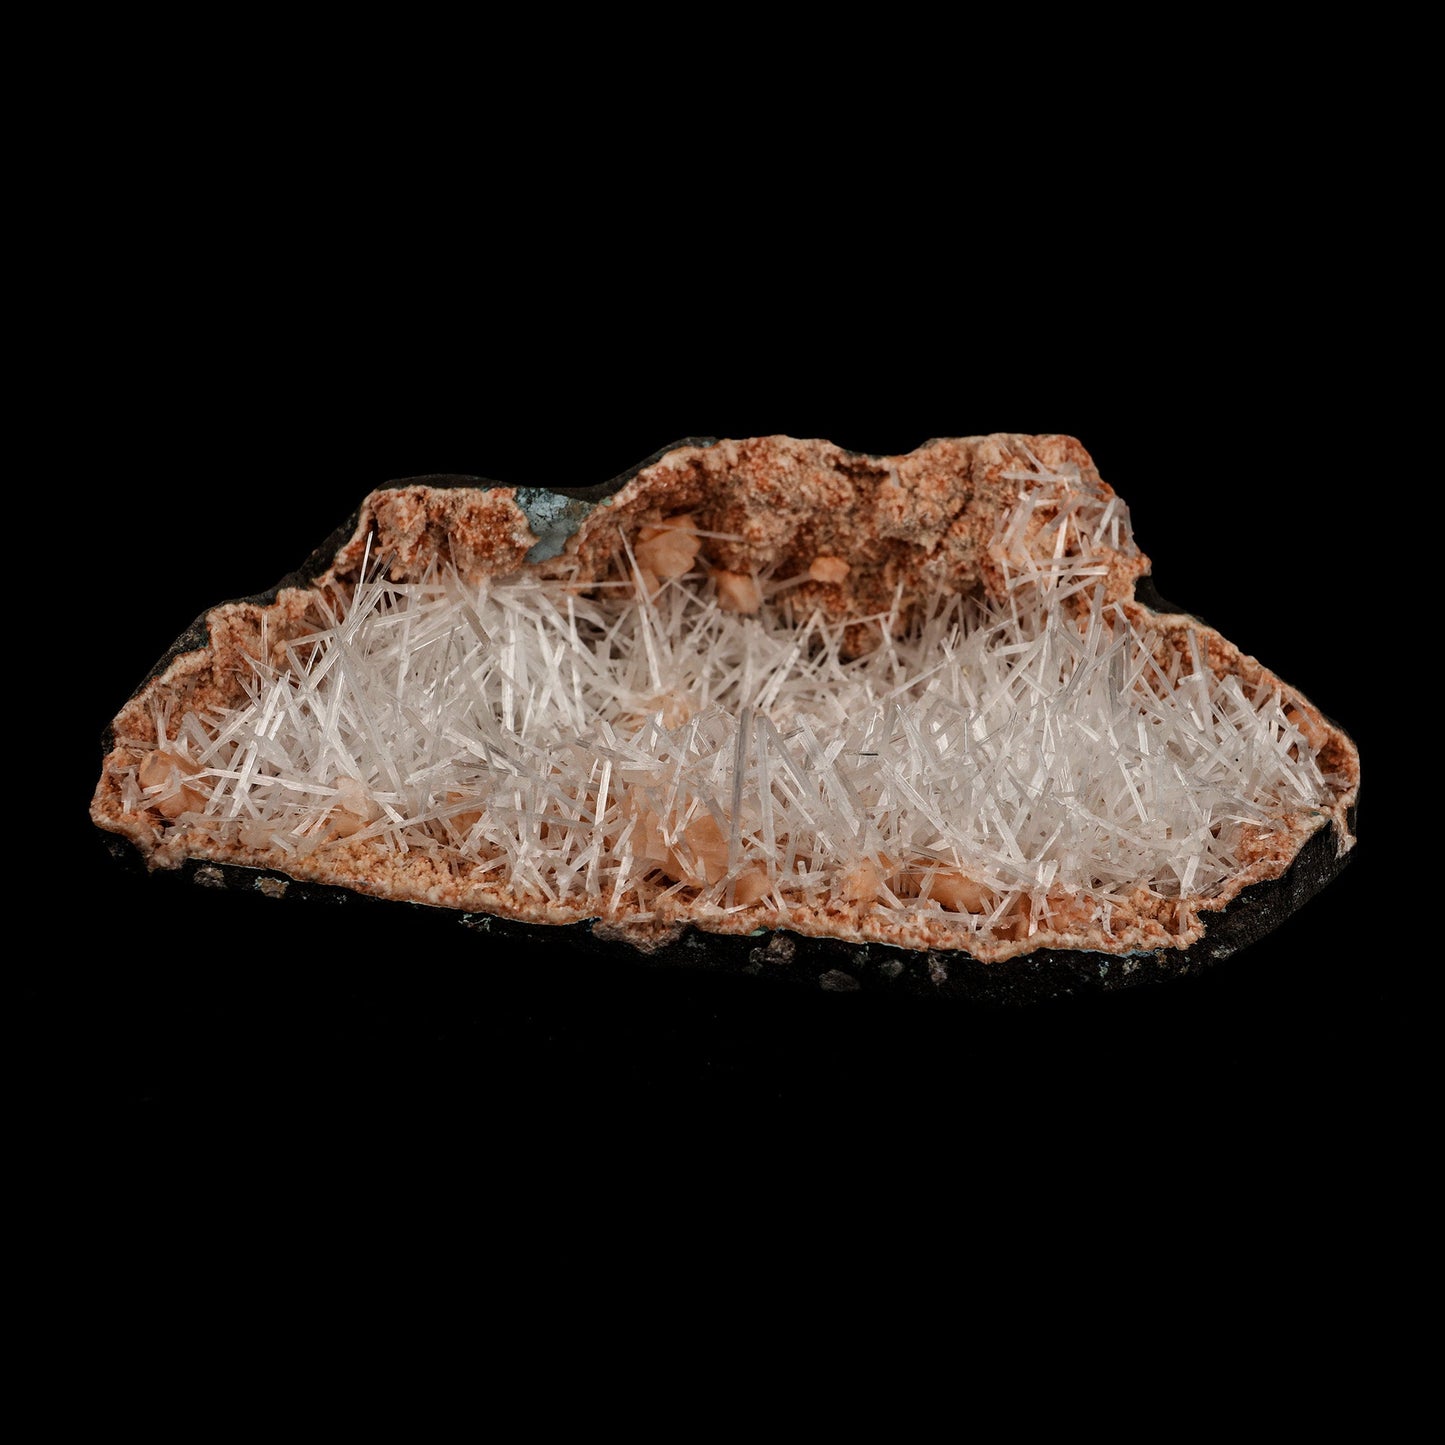 Scolecite Sprays Inside Heulandite Geode Natural Mineral Specimen # B…  https://www.superbminerals.us/products/scolecite-sprays-inside-heulandite-geode-natural-mineral-specimen-b-5071  Features: A big, free-standing Geode bordered with peach-colored Heulandite crystals and including two clusters of beige Stilbite crystals. The Geode is a three-dimensional object that is tall, thin, and deep. Very attractive and in great condition. Primary Mineral(s): ScoleciteSecondary Mineral(s): Heulandite